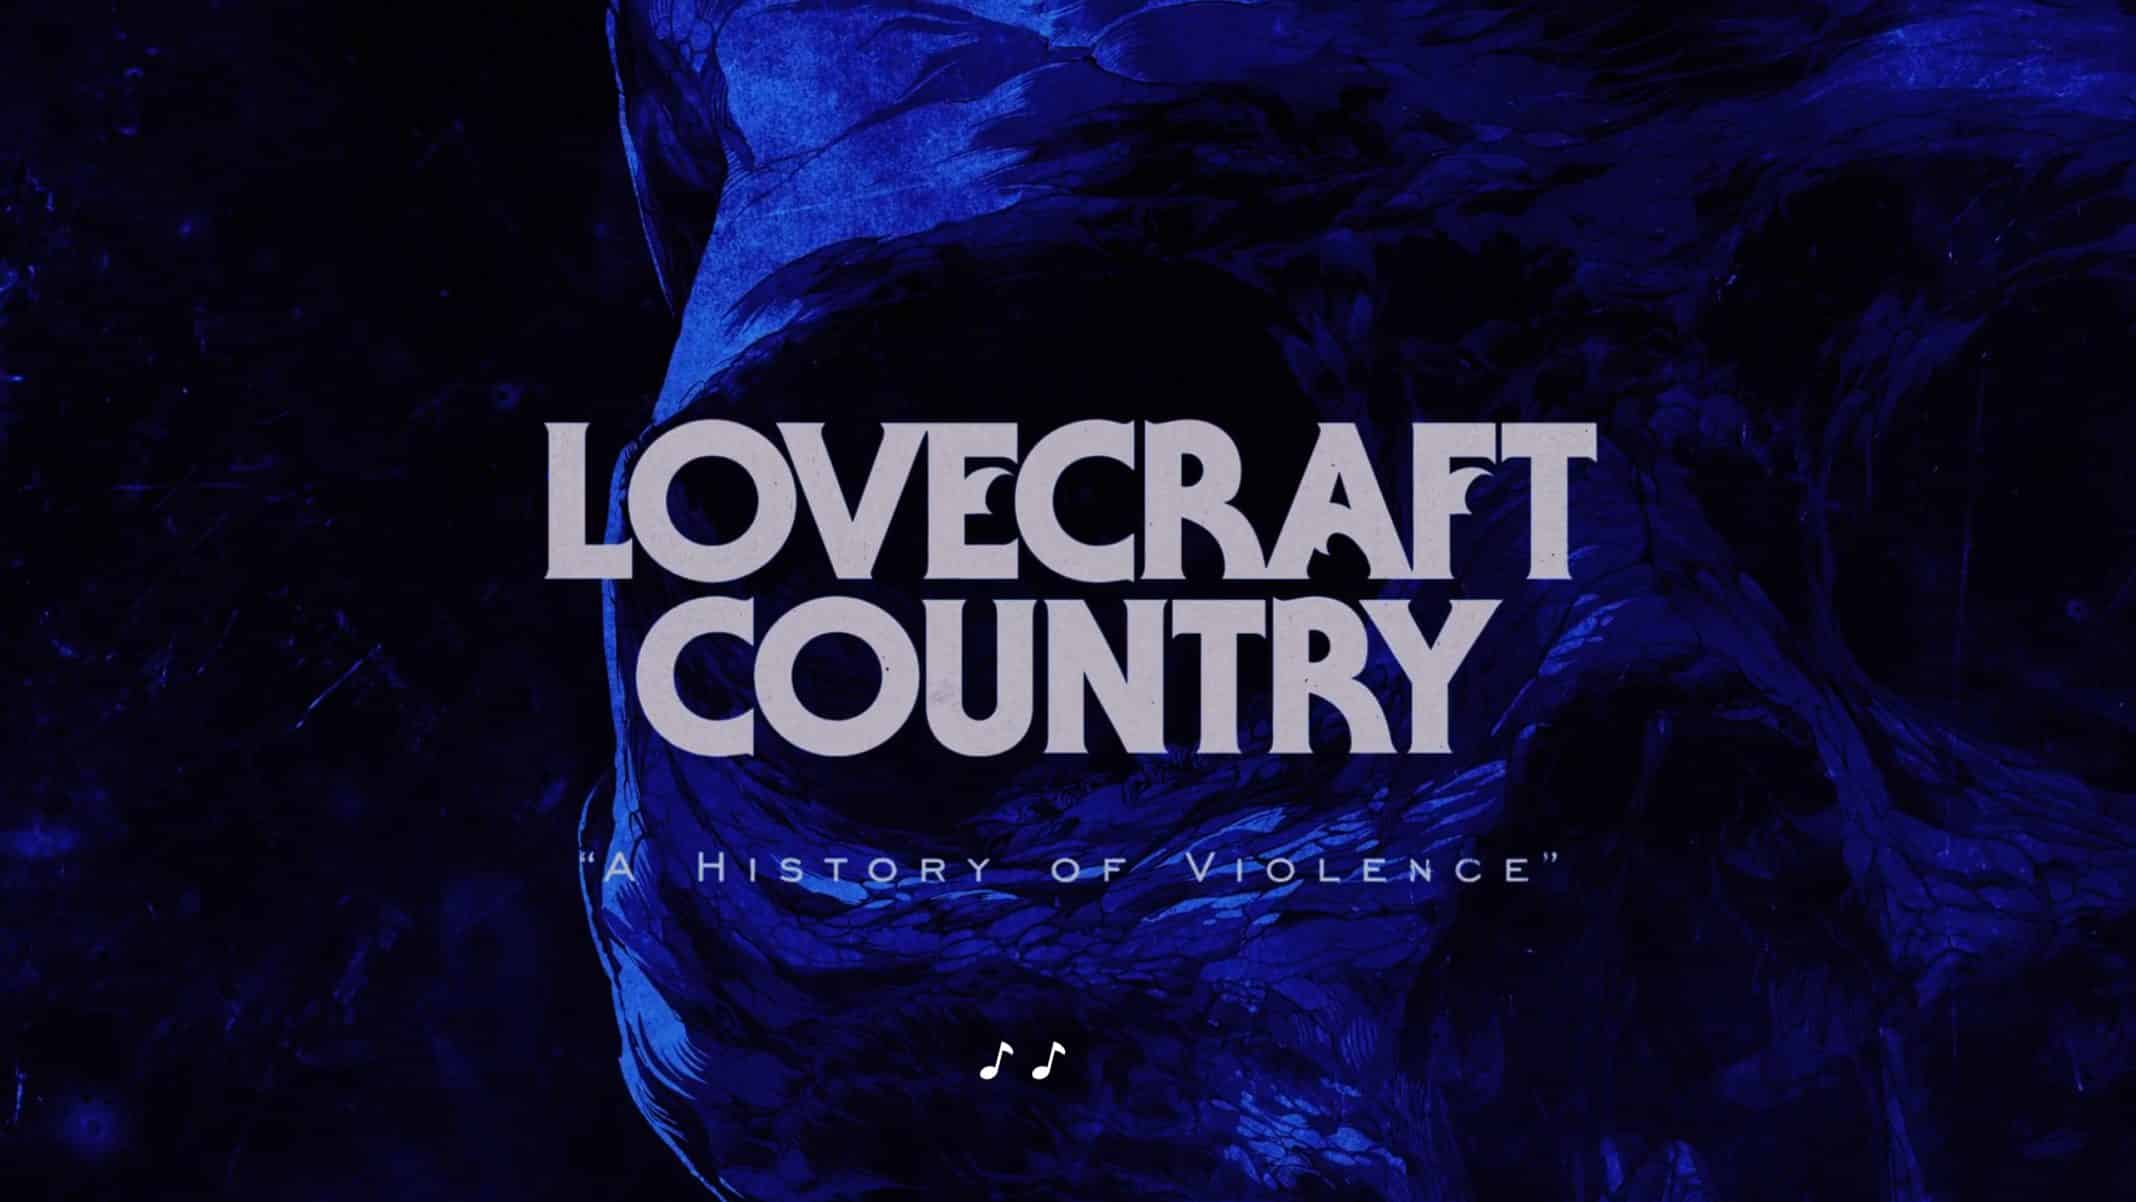 Title Card - Lovecraft Country Season 1 Episode 4 A History of Violence